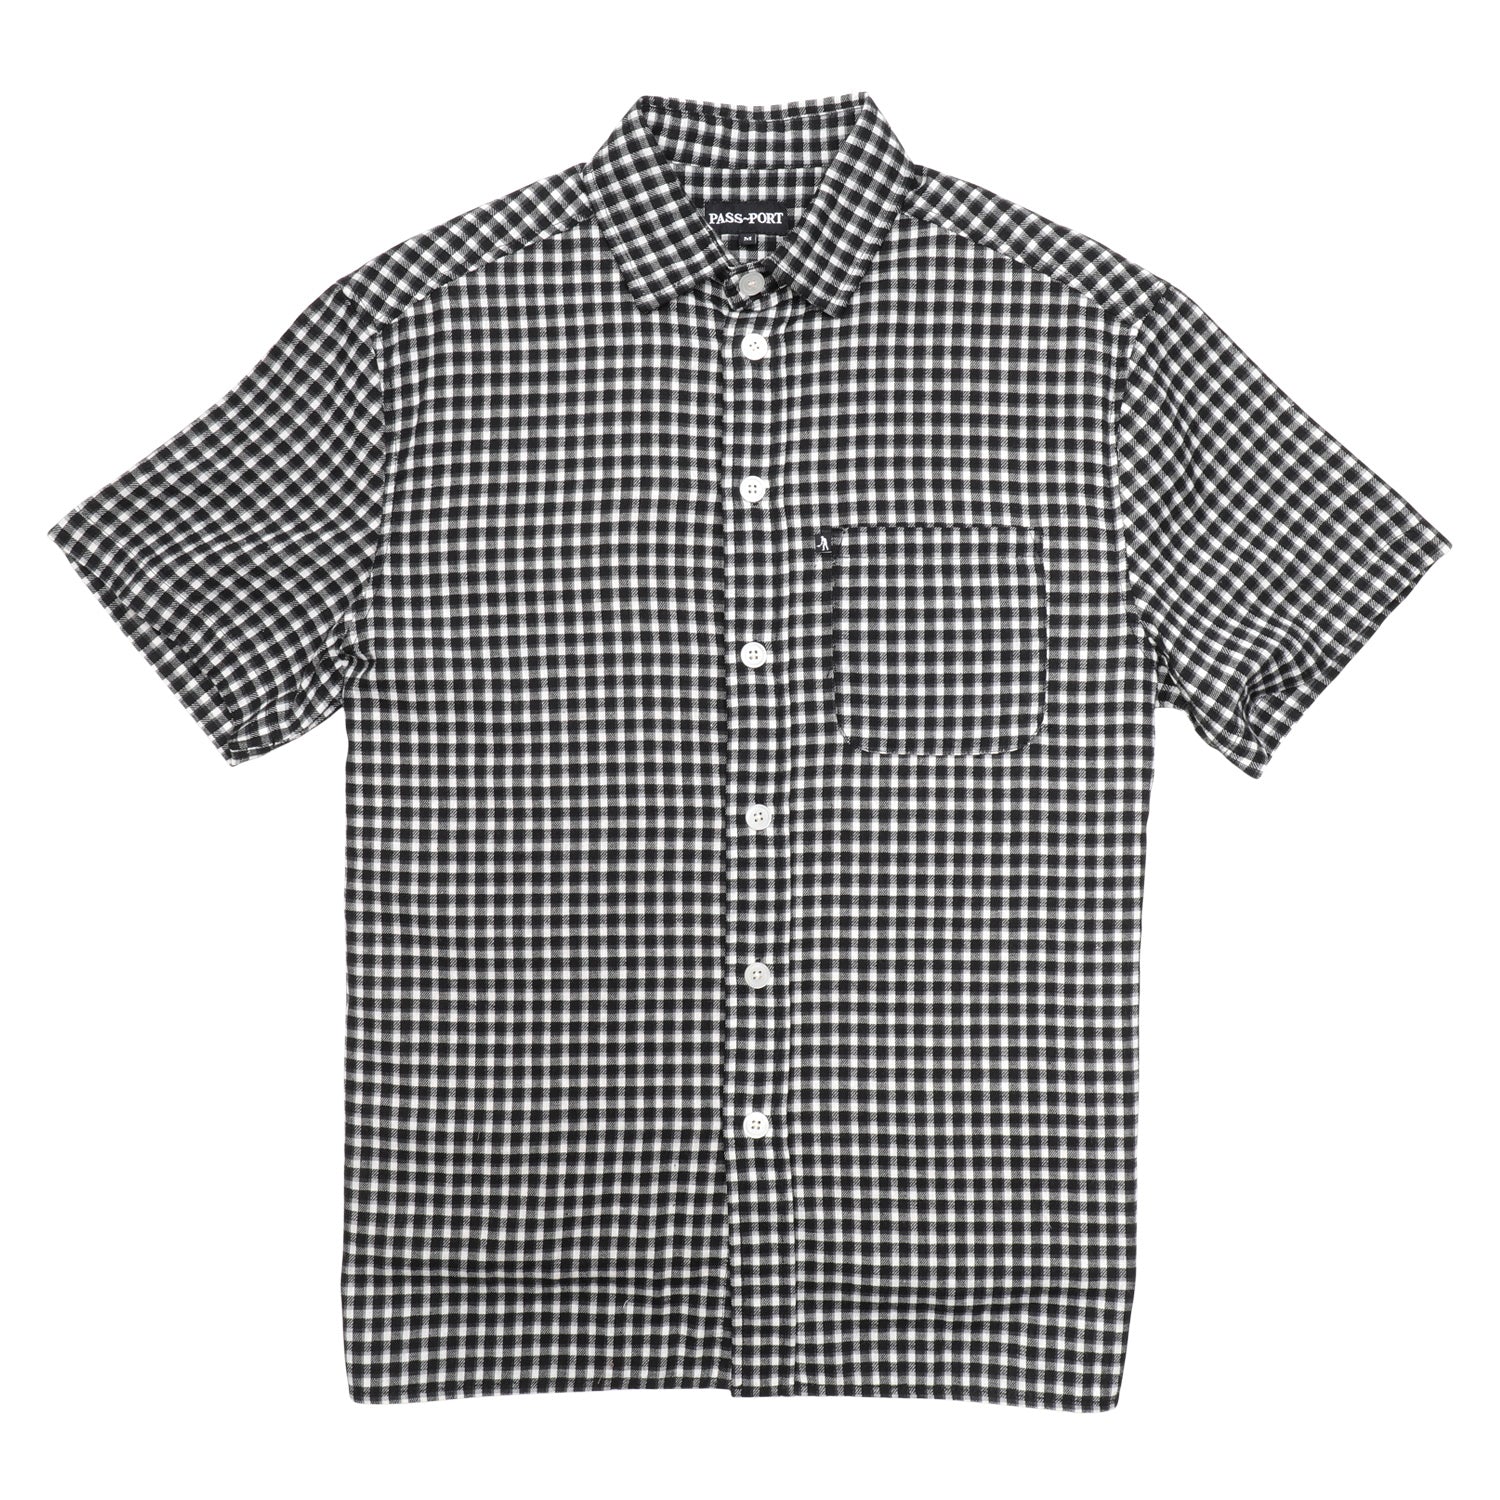 Workers Check Shirt, Black